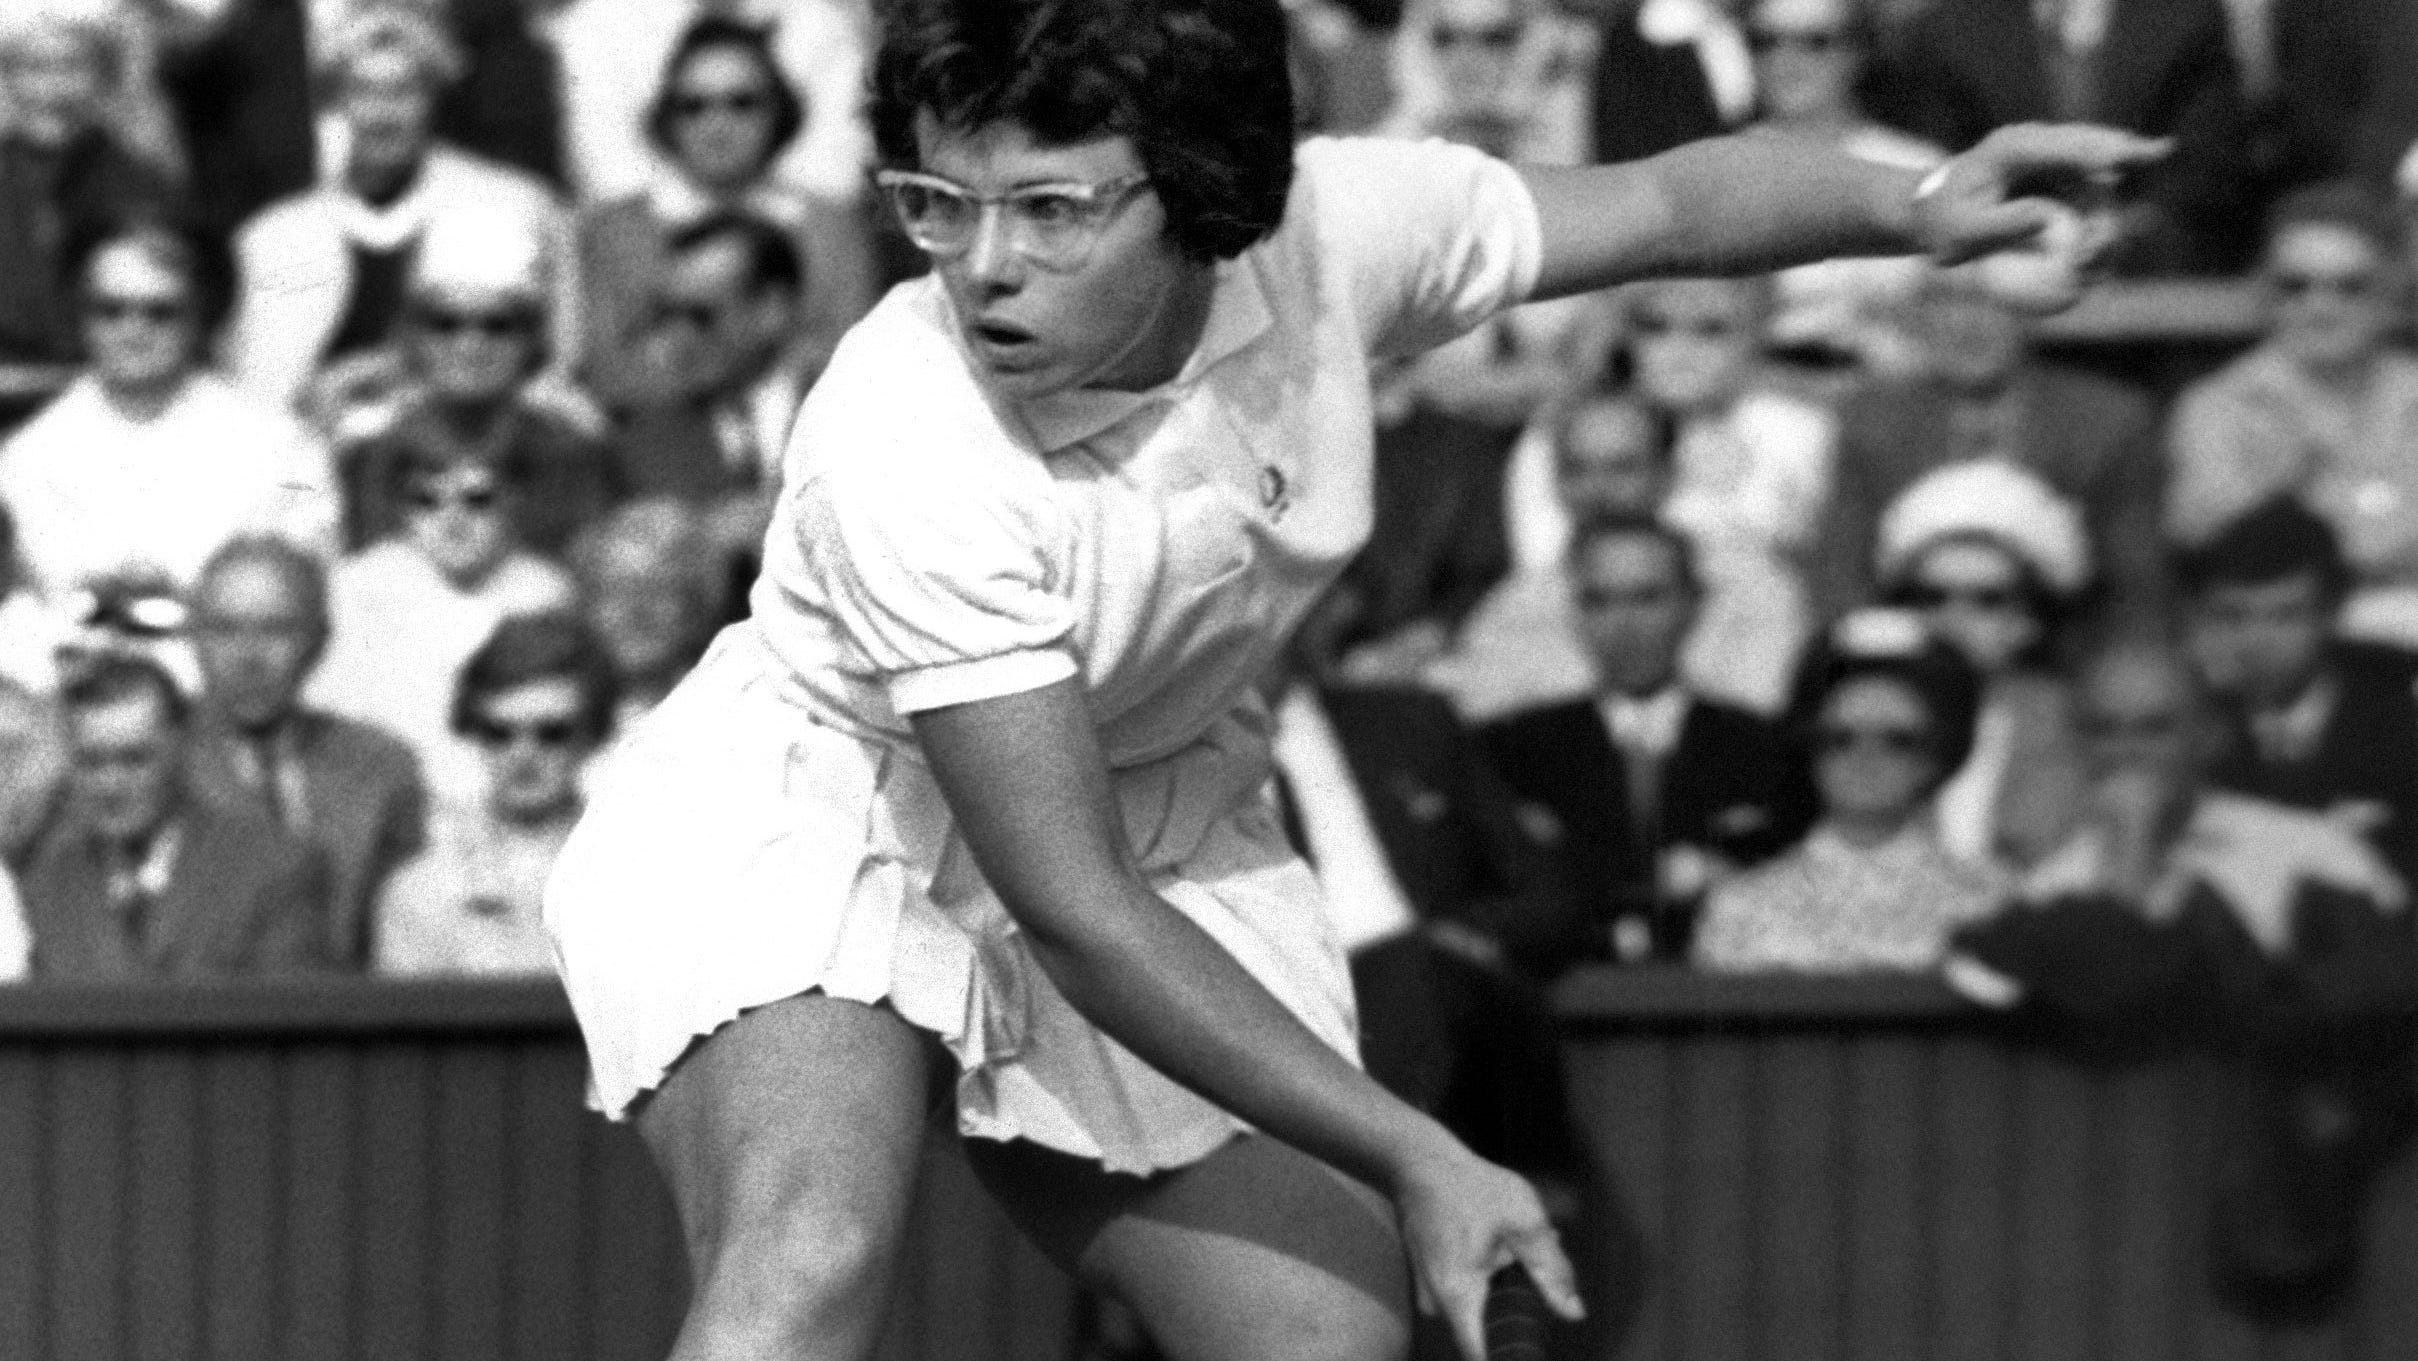 How Billie Jean King Picked Her Outfit for the Battle of the Sexes Match, Arts & Culture